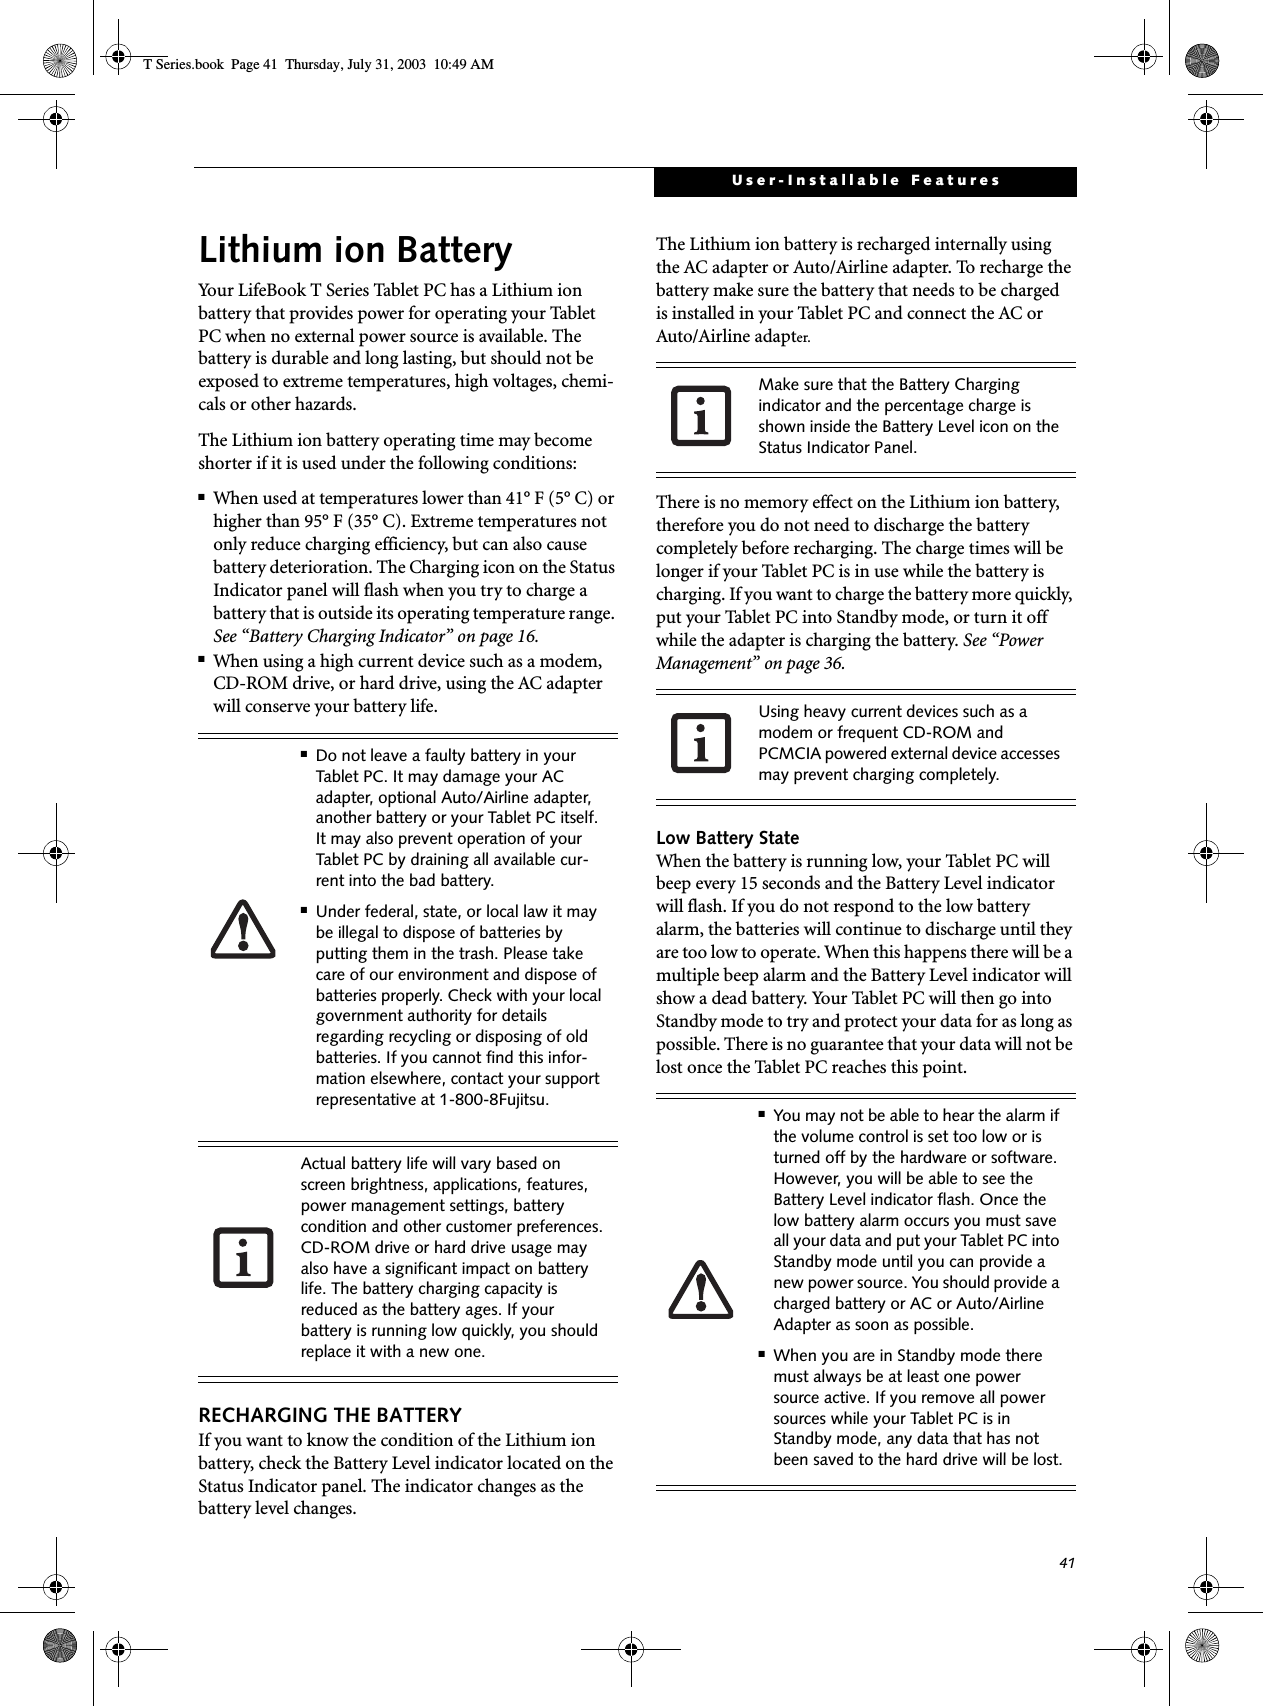 41User-Installable FeaturesLithium ion BatteryYour LifeBook T Series Tablet PC has a Lithium ion battery that provides power for operating your Tablet PC when no external power source is available. The battery is durable and long lasting, but should not be exposed to extreme temperatures, high voltages, chemi-cals or other hazards.The Lithium ion battery operating time may become shorter if it is used under the following conditions:■When used at temperatures lower than 41° F (5° C) or higher than 95° F (35° C). Extreme temperatures not only reduce charging efficiency, but can also cause battery deterioration. The Charging icon on the Status Indicator panel will flash when you try to charge a battery that is outside its operating temperature range. See “Battery Charging Indicator” on page 16.■When using a high current device such as a modem, CD-ROM drive, or hard drive, using the AC adapter will conserve your battery life.RECHARGING THE BATTERYIf you want to know the condition of the Lithium ion battery, check the Battery Level indicator located on the Status Indicator panel. The indicator changes as the battery level changes.The Lithium ion battery is recharged internally using the AC adapter or Auto/Airline adapter. To recharge the battery make sure the battery that needs to be charged is installed in your Tablet PC and connect the AC orAuto/Airline adapter.There is no memory effect on the Lithium ion battery, therefore you do not need to discharge the battery completely before recharging. The charge times will be longer if your Tablet PC is in use while the battery is charging. If you want to charge the battery more quickly, put your Tablet PC into Standby mode, or turn it off while the adapter is charging the battery. See “Power Management” on page 36.Low Battery StateWhen the battery is running low, your Tablet PC will beep every 15 seconds and the Battery Level indicator will flash. If you do not respond to the low battery alarm, the batteries will continue to discharge until they are too low to operate. When this happens there will be a multiple beep alarm and the Battery Level indicator will show a dead battery. Your Tablet PC will then go into Standby mode to try and protect your data for as long as possible. There is no guarantee that your data will not be lost once the Tablet PC reaches this point.■Do not leave a faulty battery in your Tablet PC. It may damage your AC adapter, optional Auto/Airline adapter, another battery or your Tablet PC itself. It may also prevent operation of your Tablet PC by draining all available cur-rent into the bad battery.■Under federal, state, or local law it may be illegal to dispose of batteries by putting them in the trash. Please take care of our environment and dispose of batteries properly. Check with your local government authority for details regarding recycling or disposing of old batteries. If you cannot find this infor-mation elsewhere, contact your support representative at 1-800-8Fujitsu.Actual battery life will vary based on screen brightness, applications, features, power management settings, battery condition and other customer preferences.CD-ROM drive or hard drive usage may also have a significant impact on battery life. The battery charging capacity is reduced as the battery ages. If your battery is running low quickly, you should replace it with a new one.Make sure that the Battery Charging indicator and the percentage charge is shown inside the Battery Level icon on the Status Indicator Panel.Using heavy current devices such as a modem or frequent CD-ROM and PCMCIA powered external device accesses may prevent charging completely.■You may not be able to hear the alarm if the volume control is set too low or is turned off by the hardware or software. However, you will be able to see the Battery Level indicator flash. Once the low battery alarm occurs you must save all your data and put your Tablet PC into Standby mode until you can provide a new power source. You should provide a charged battery or AC or Auto/Airline Adapter as soon as possible. ■When you are in Standby mode there must always be at least one power source active. If you remove all power sources while your Tablet PC is in Standby mode, any data that has not been saved to the hard drive will be lost.T Series.book  Page 41  Thursday, July 31, 2003  10:49 AM